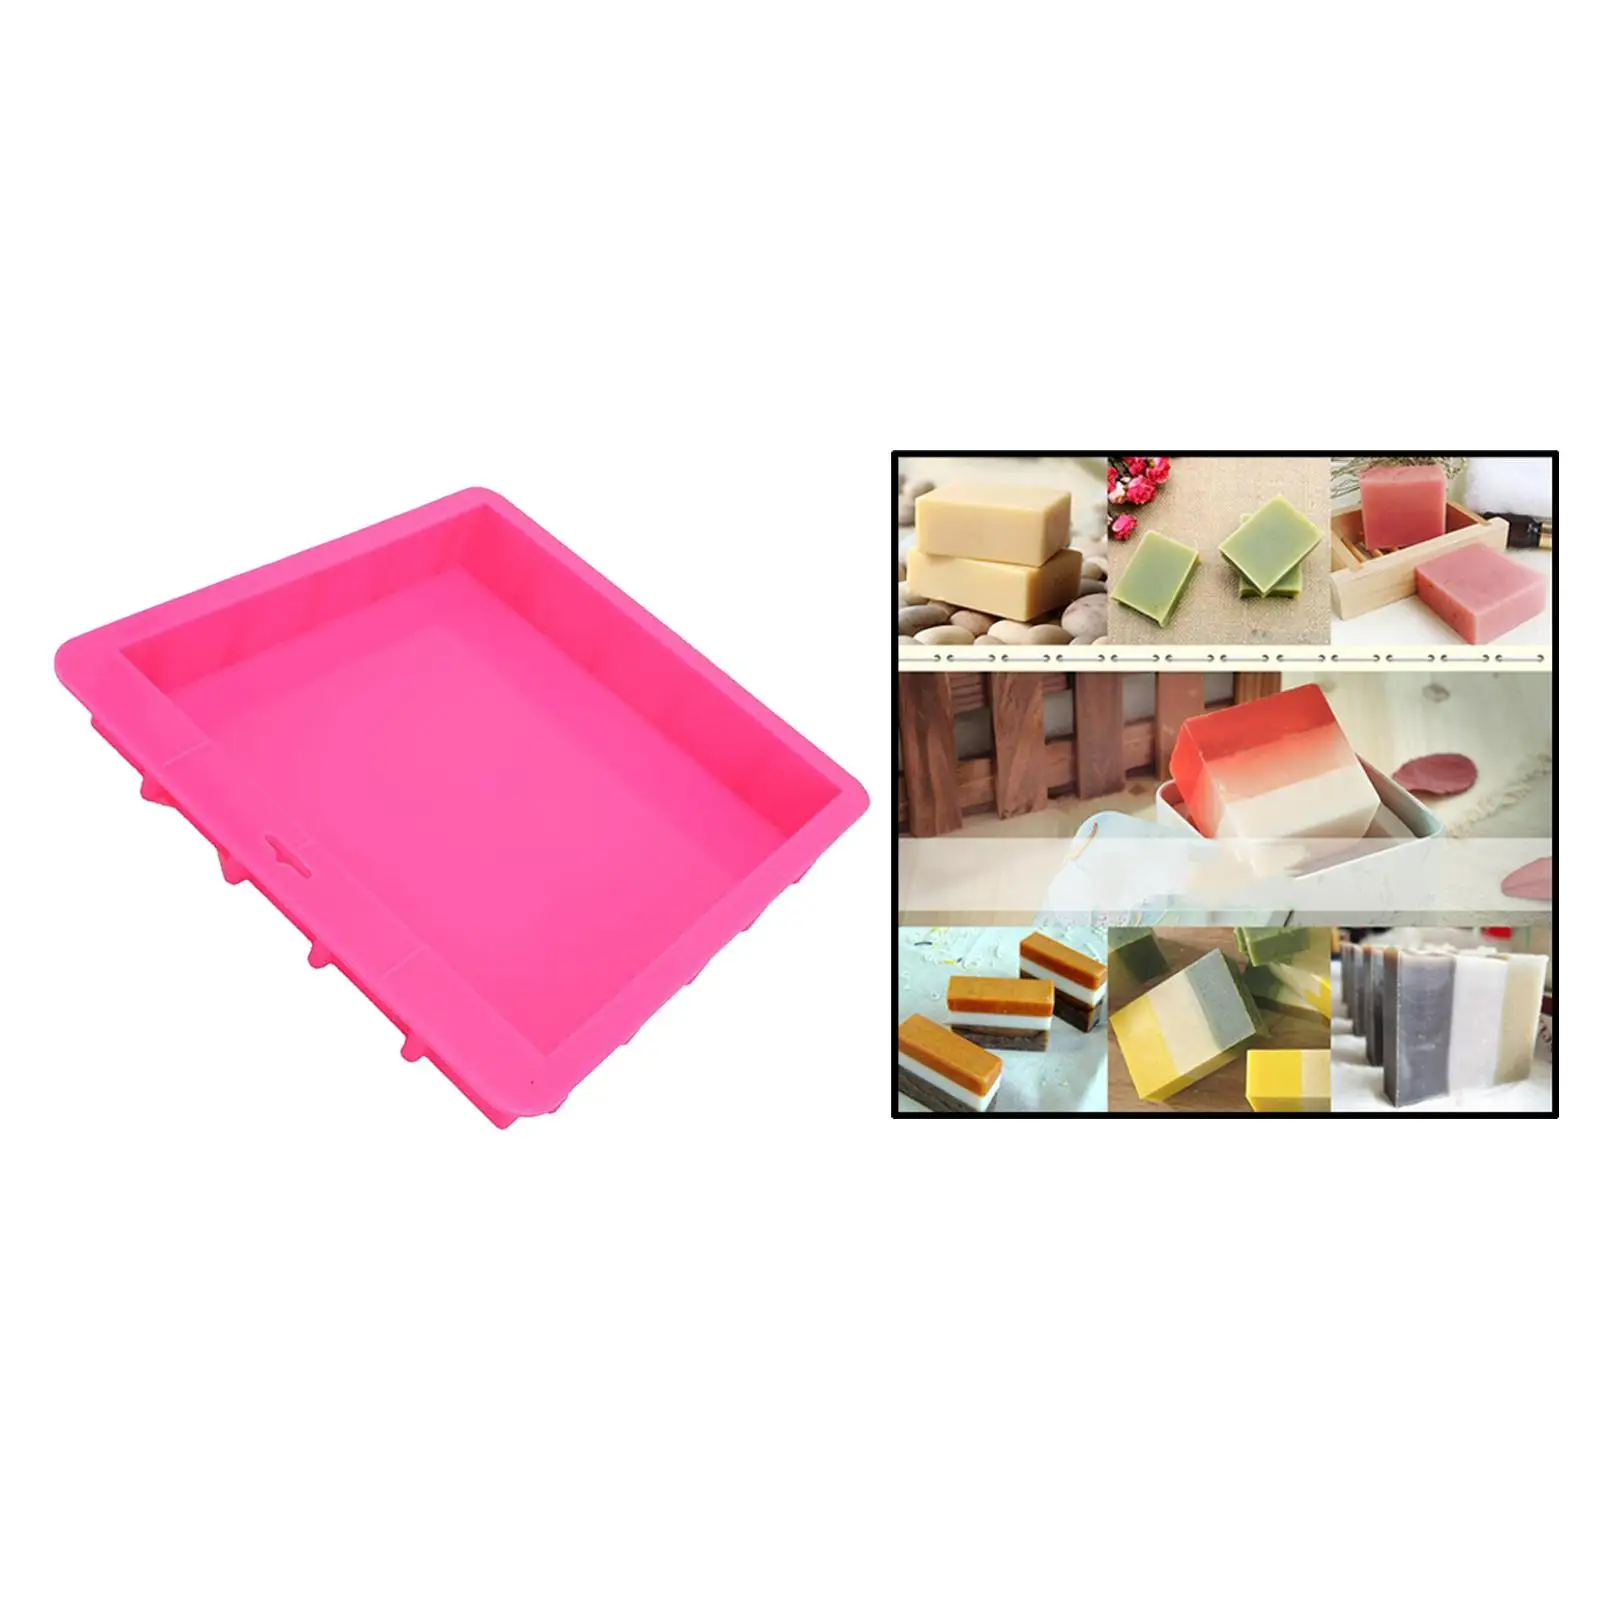 Rectangular Shape Soap Making Mould Silicone Mold for Cake Aromatherapy Baking Accessories